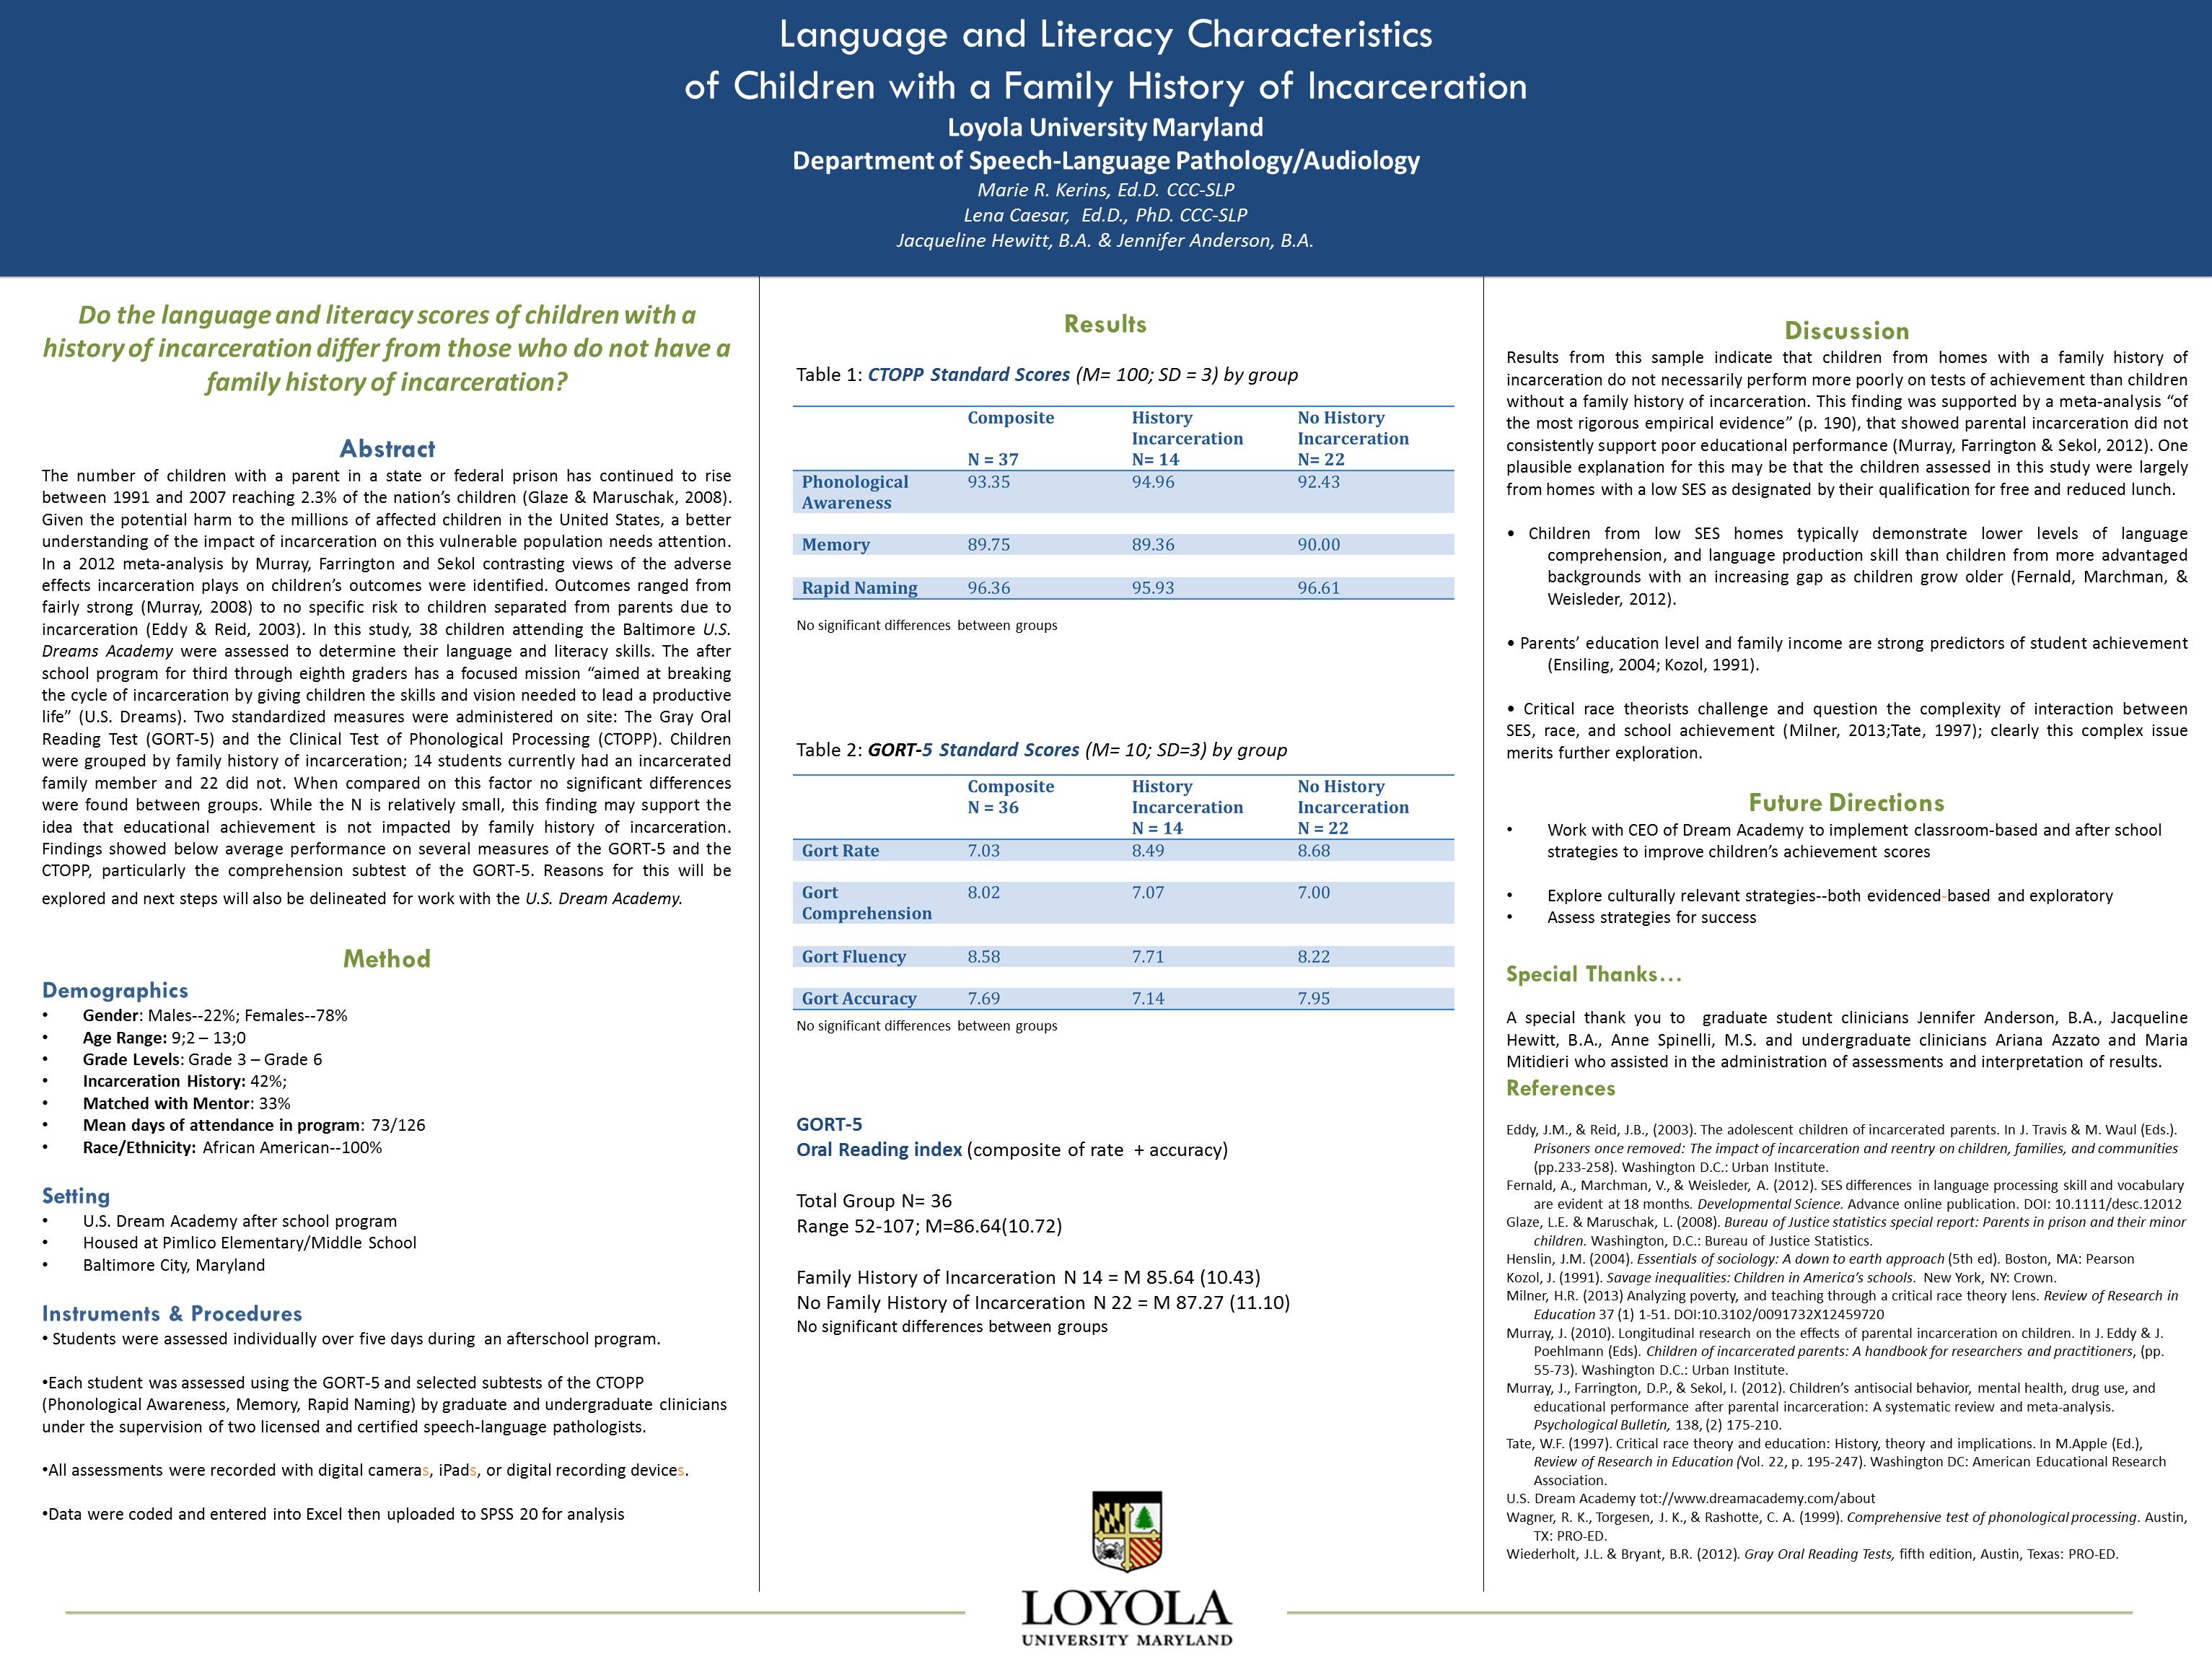 Enlarged poster image: Language and Literacy Characteristics of Children with a Family History of Incarceration